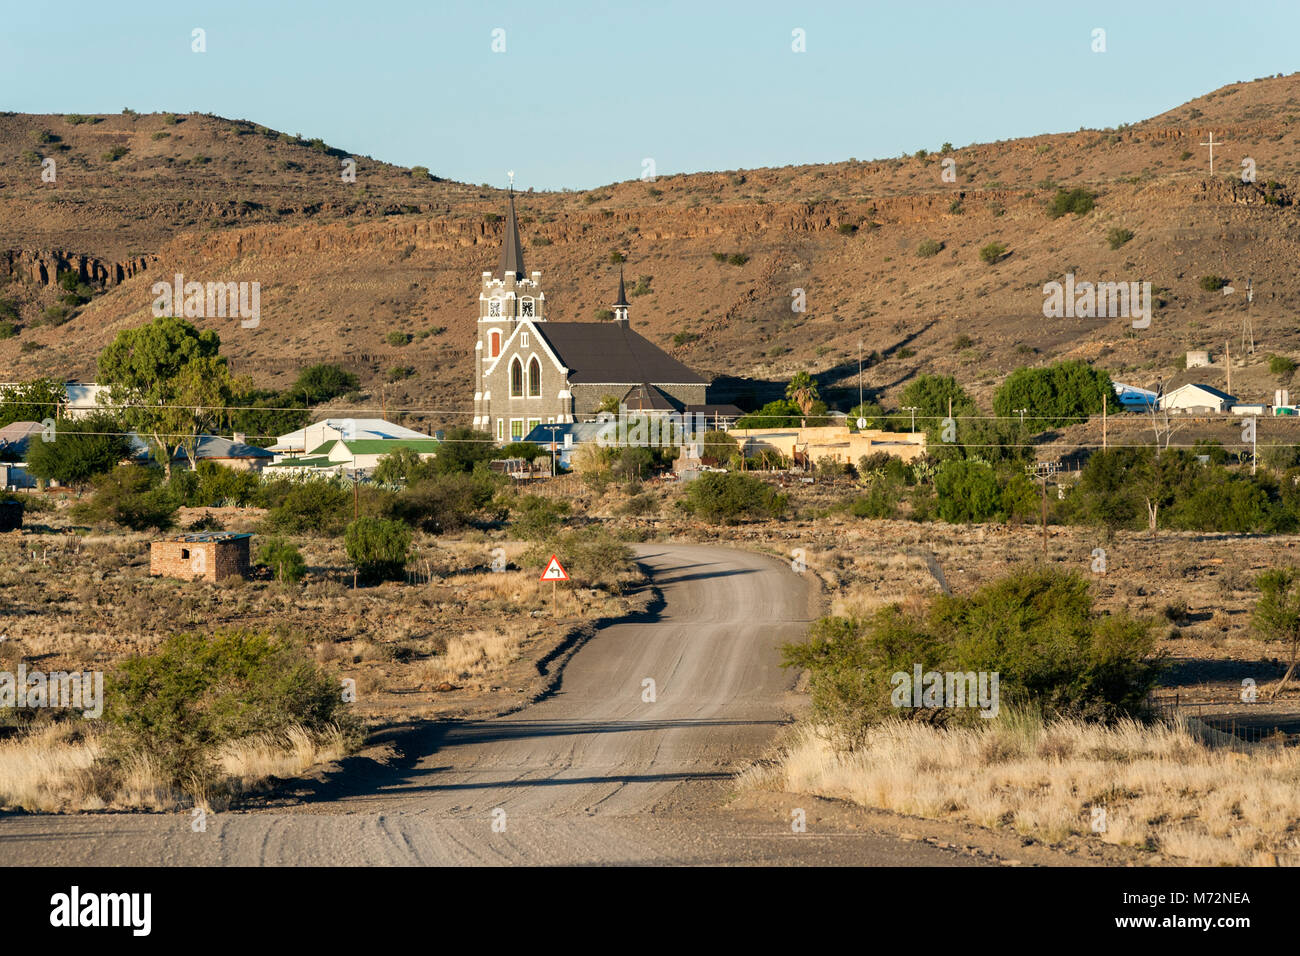 The town and church of Merweville in the Karoo region of South Africa. Stock Photo